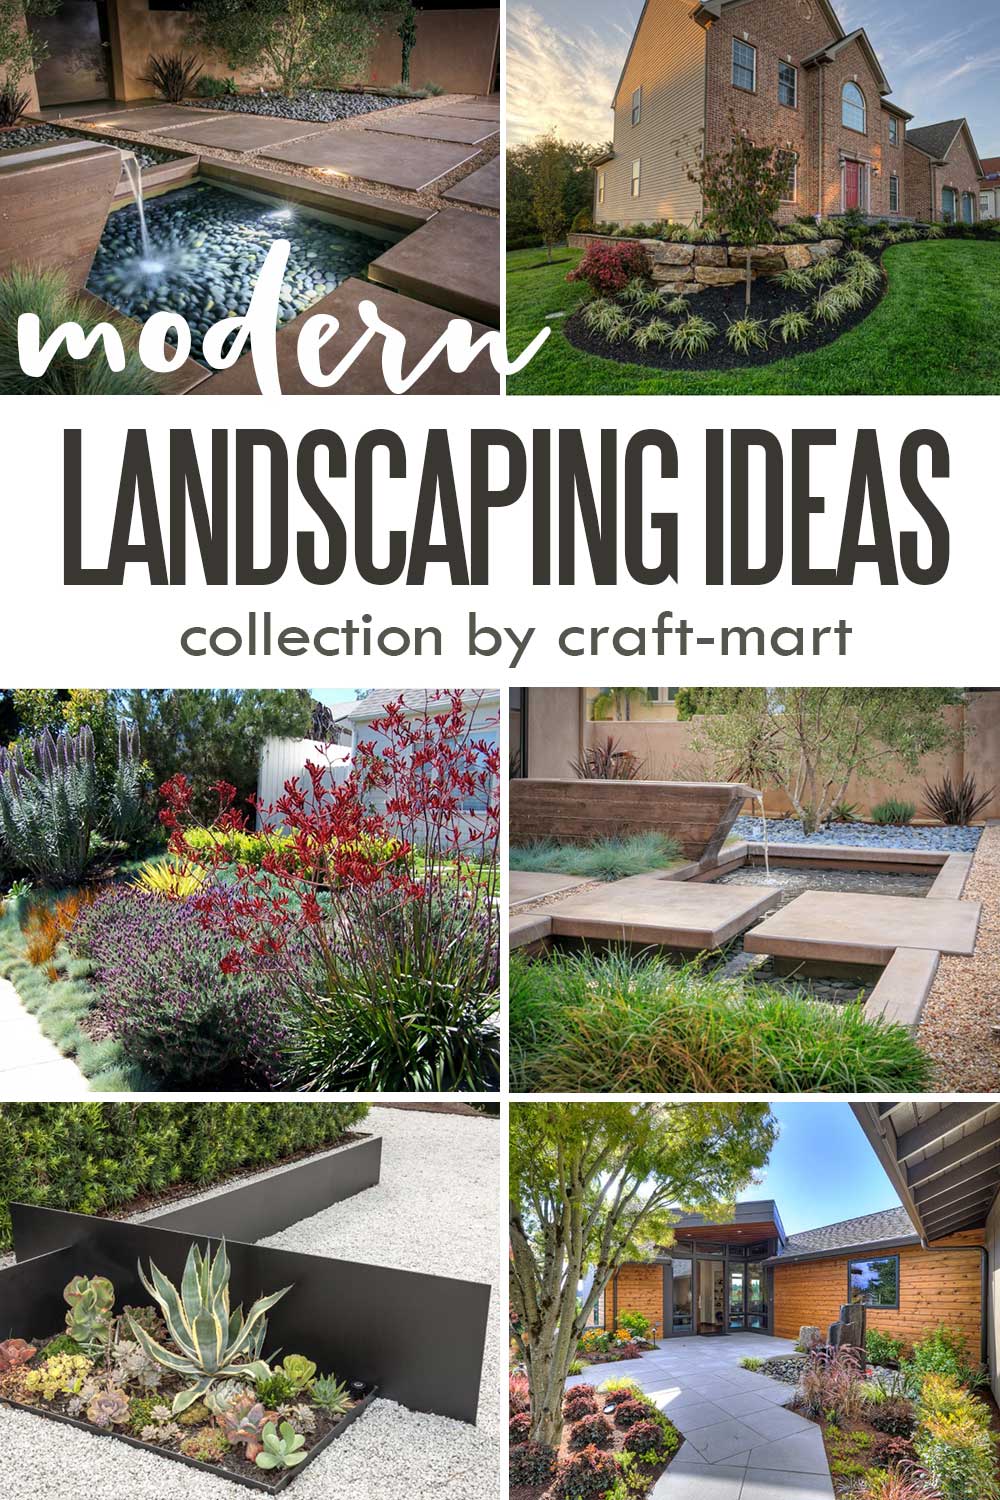 6 Landscaping Ideas for Front Yard on a Budget - Craft-Mart